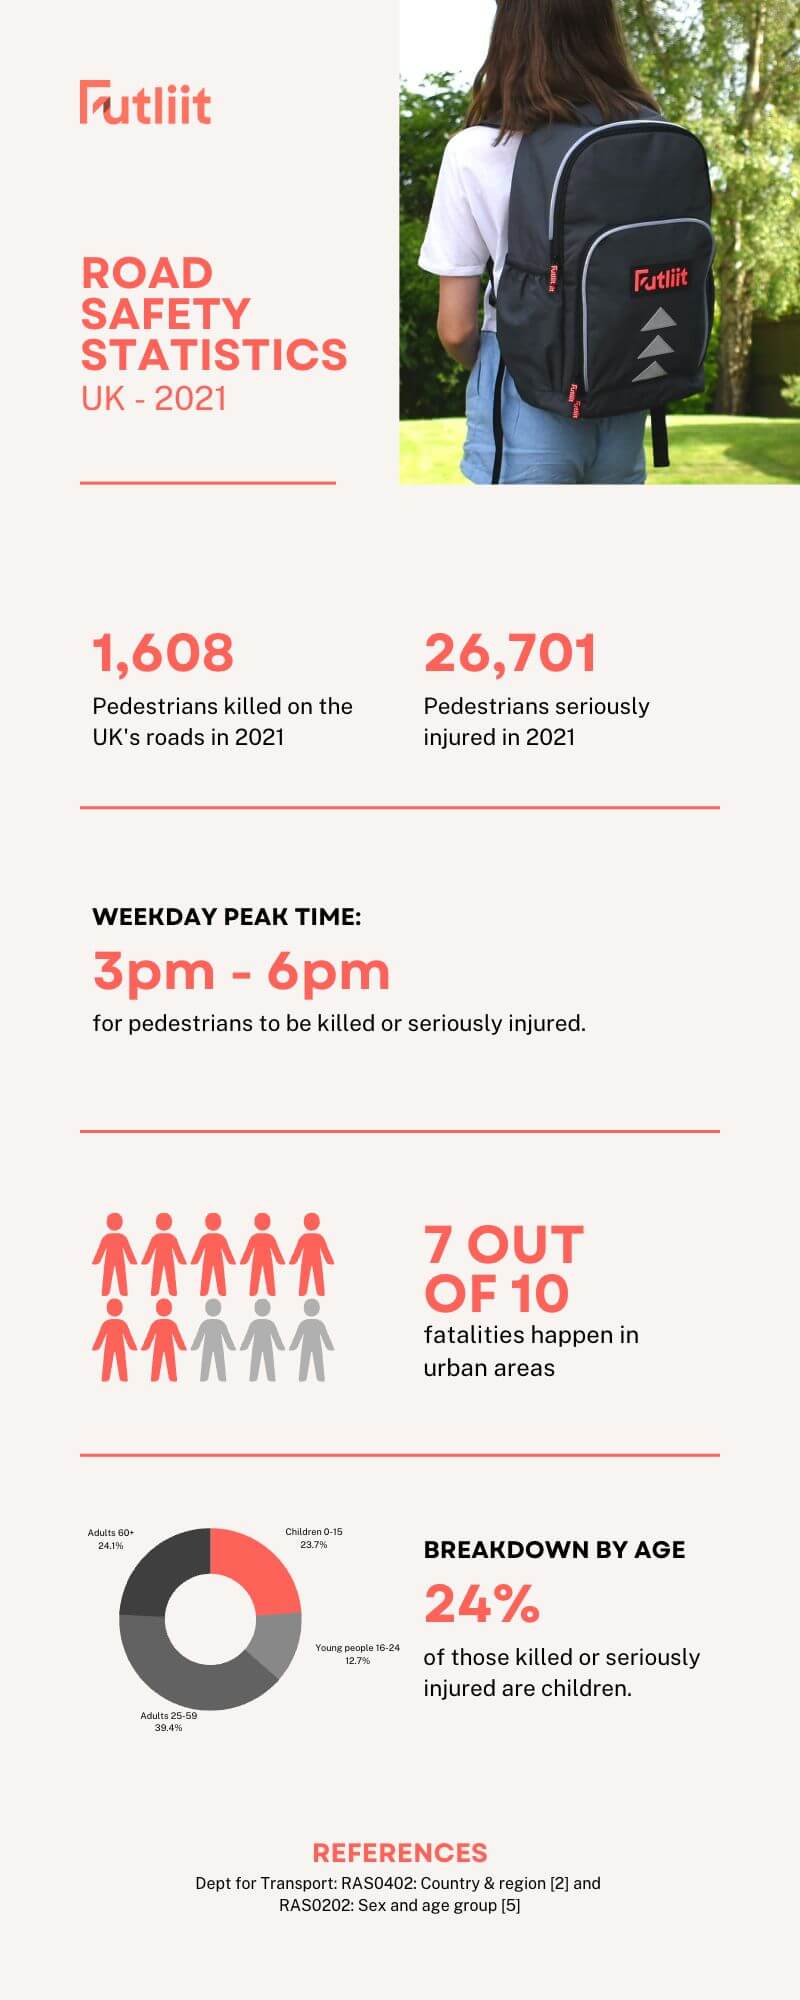 A graphic showing UK road safety statistics for 2021